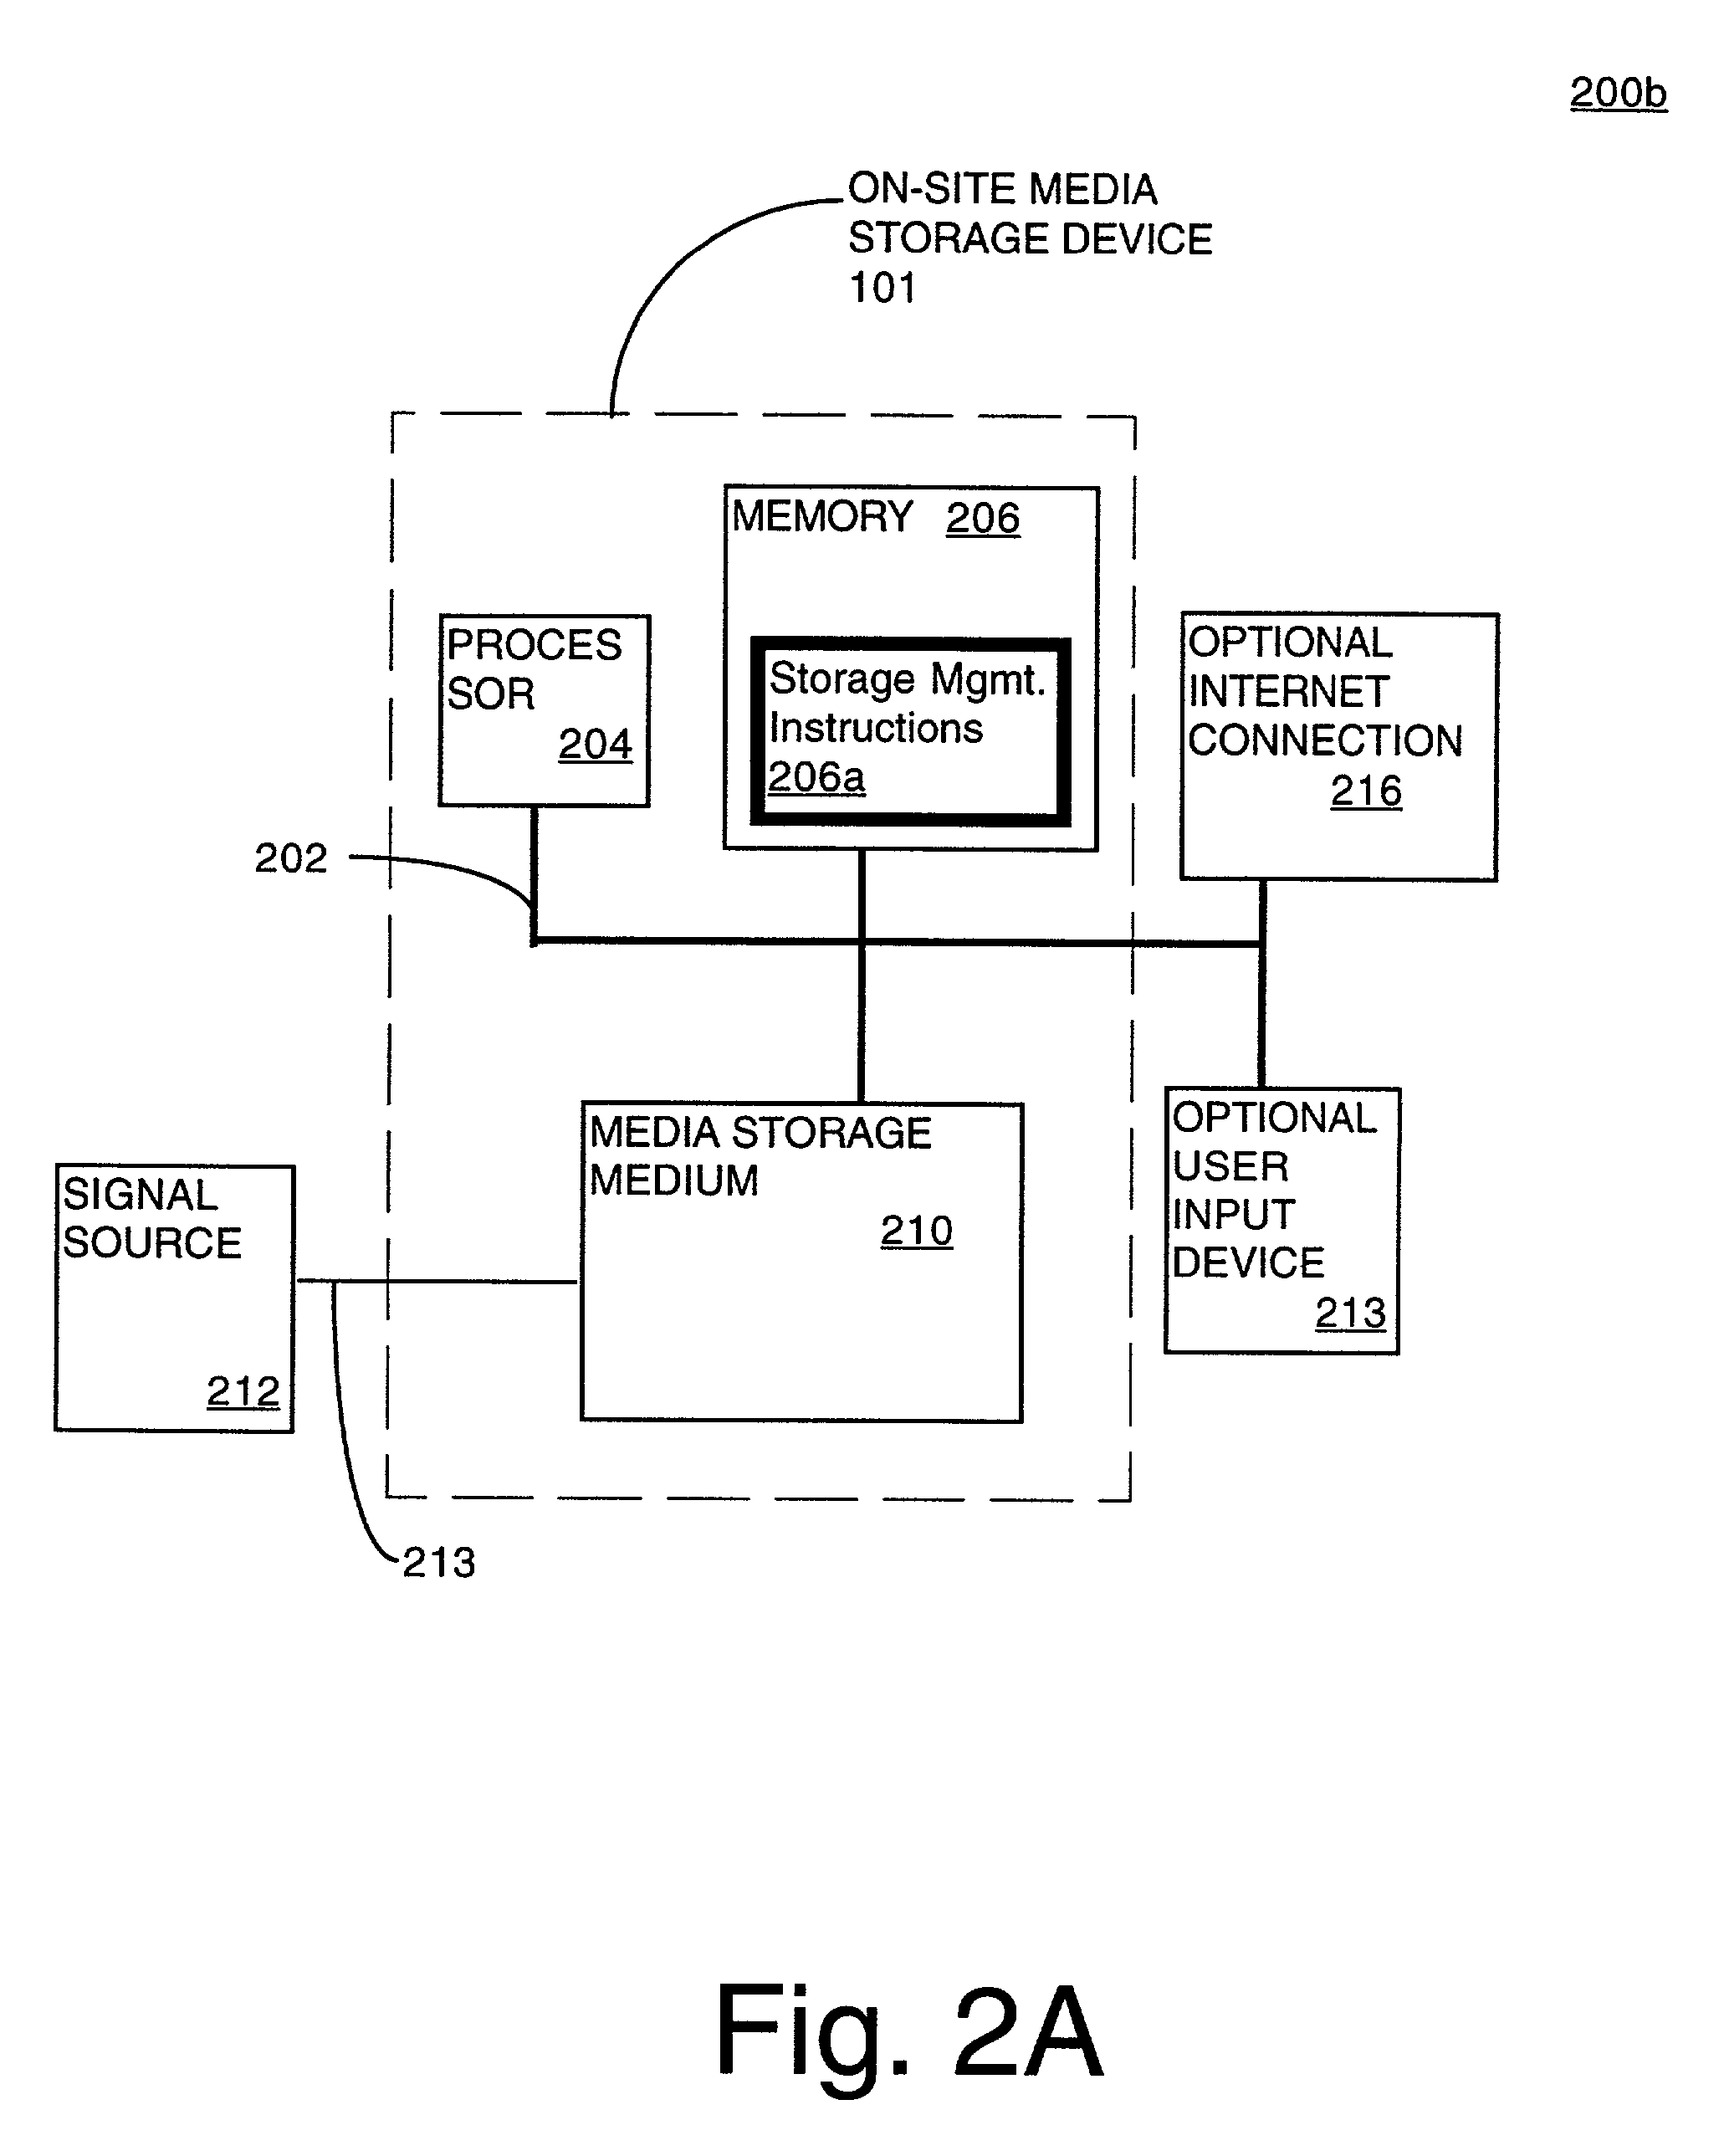 Automated context-sensitive updating on content in an audiovisual storage system